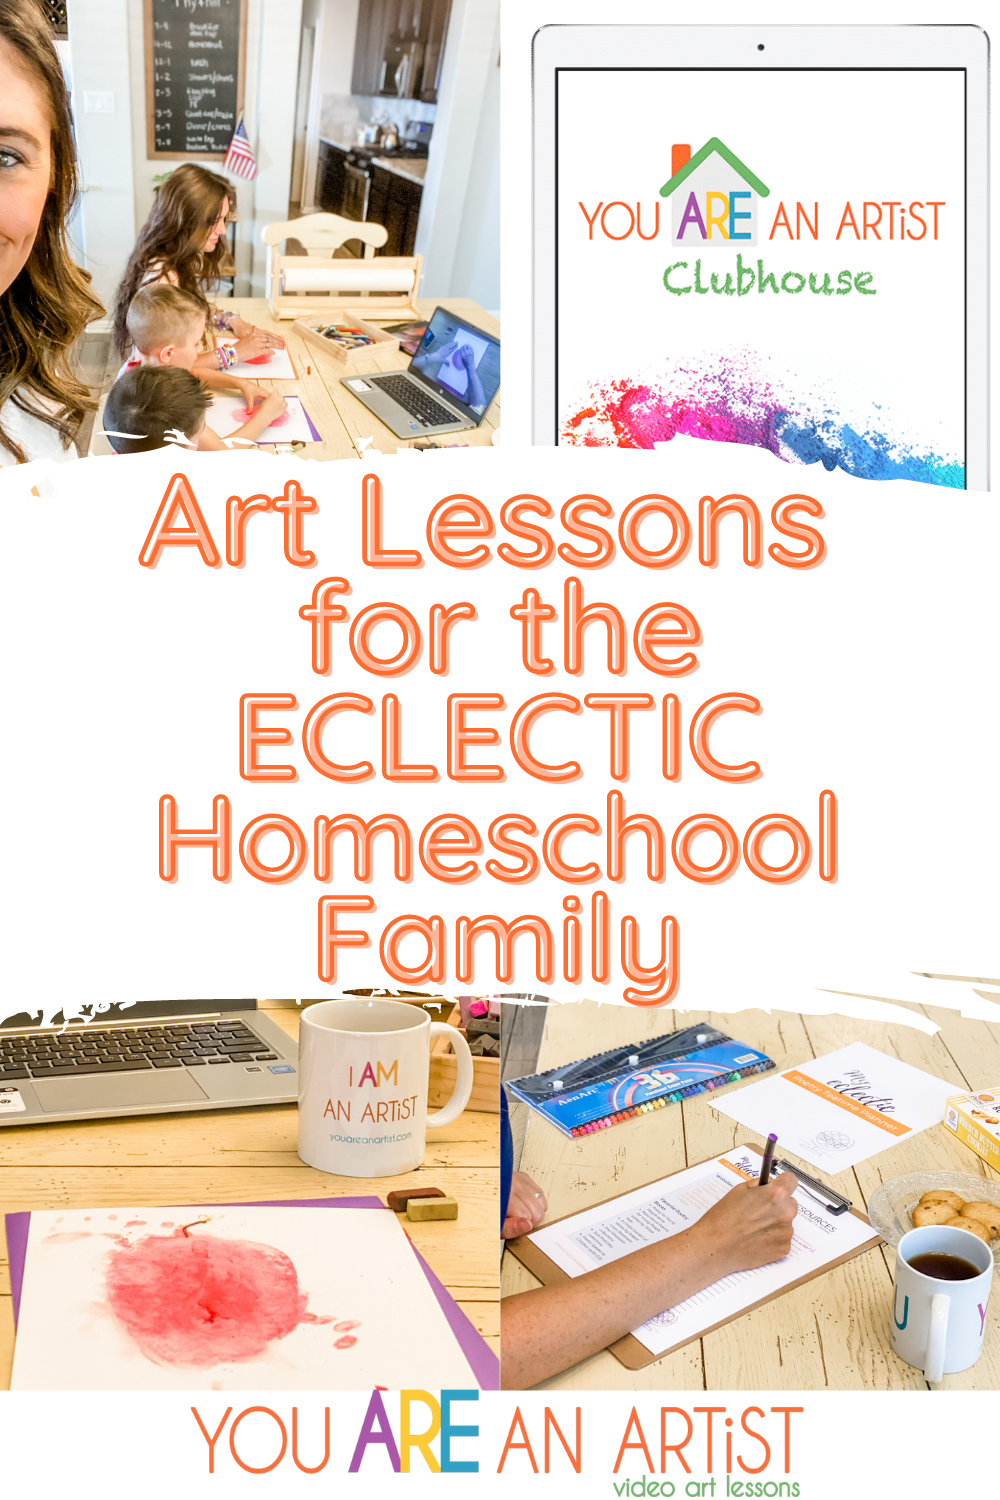 An eclectic homeschool is perfect for incorporating art! You can easily add art into practically any lesson, and your kids will thank you. #homeschoolart #eclectichomeschooling #homeschoolartlessons